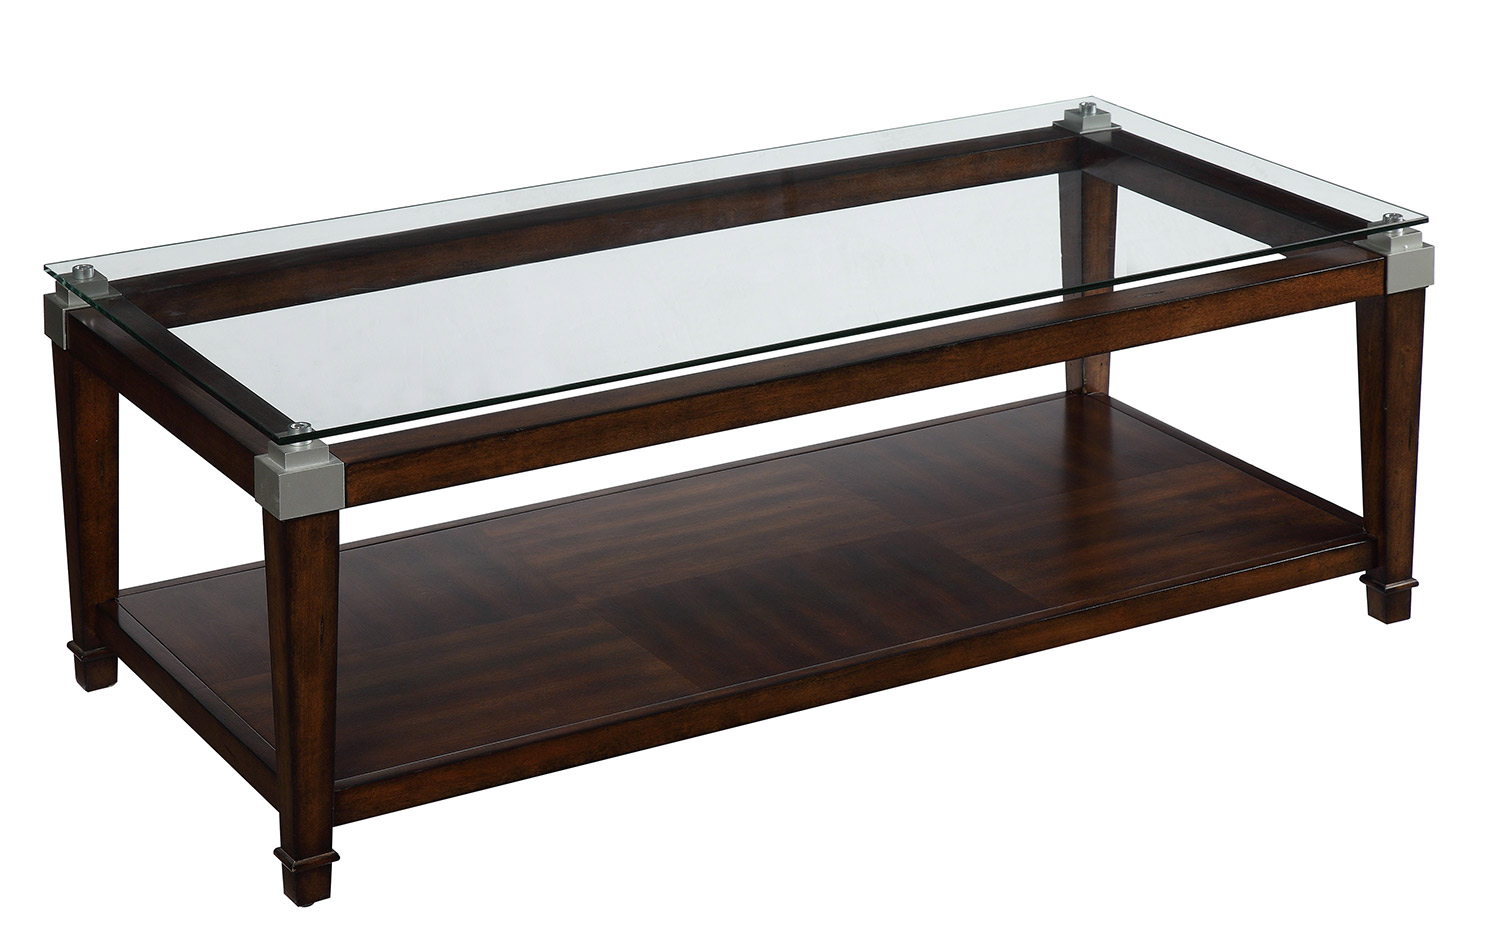 Homelegance Paseo 3-Piece Cocktail/Coffee Tables - Cherry